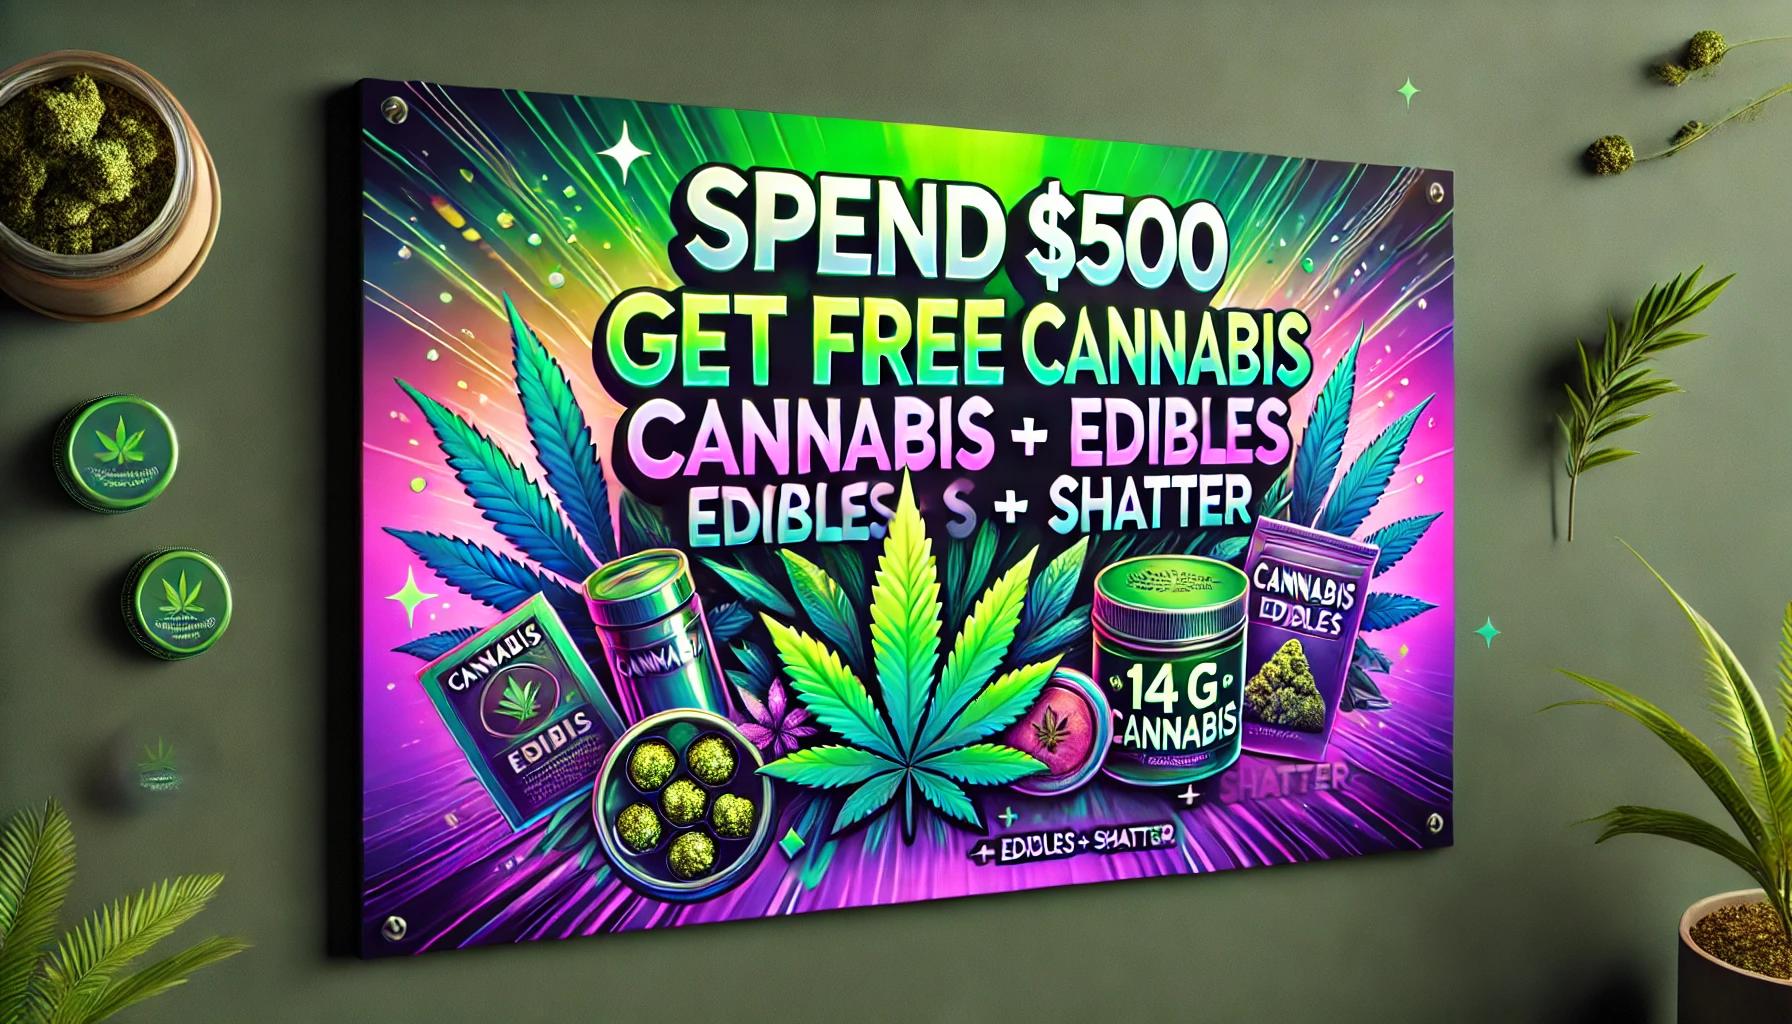 A vibrant and eye catching cannabis banner display (1)